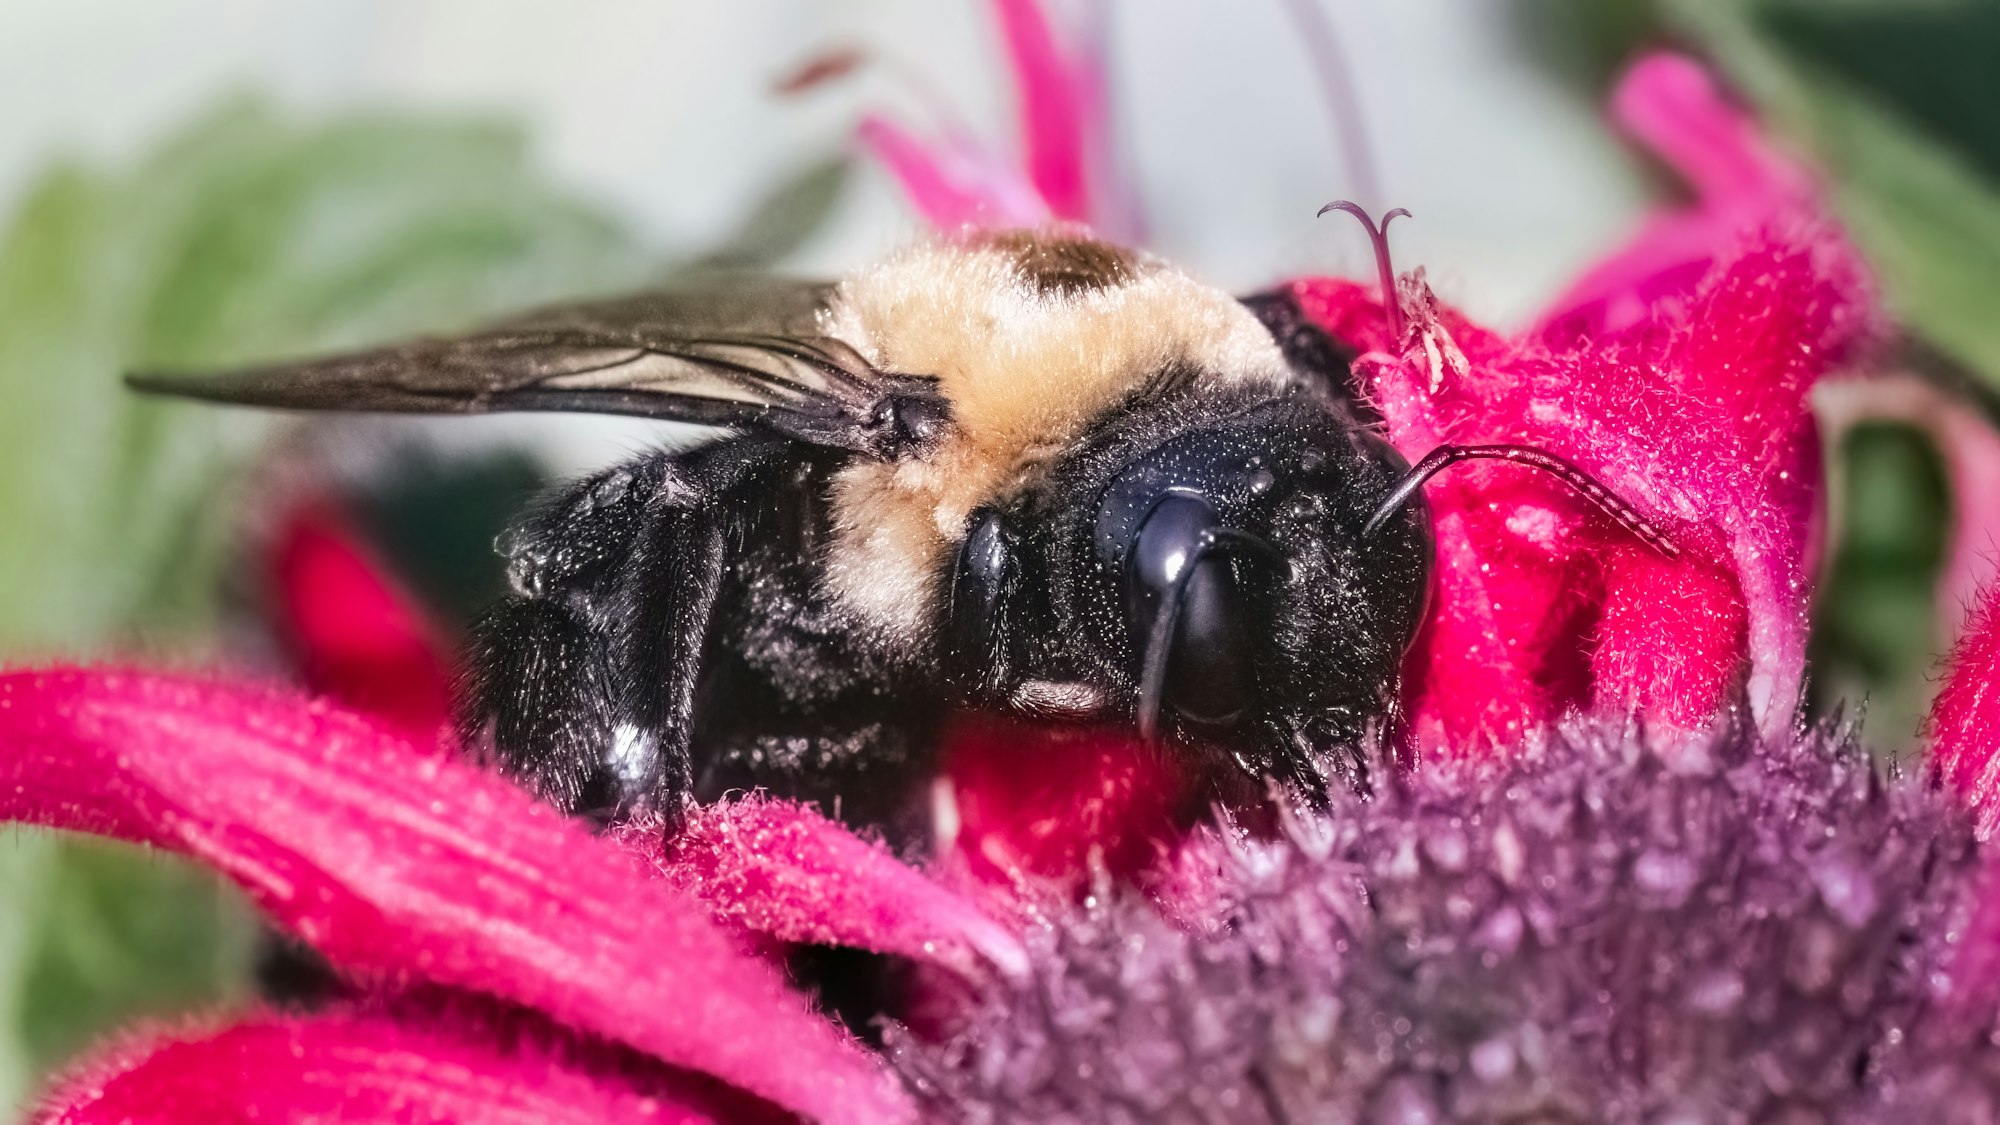 Side profile of a female Eastern Carpenter Bee (Xylocopa virginica) feeding on pink bee balm flowers